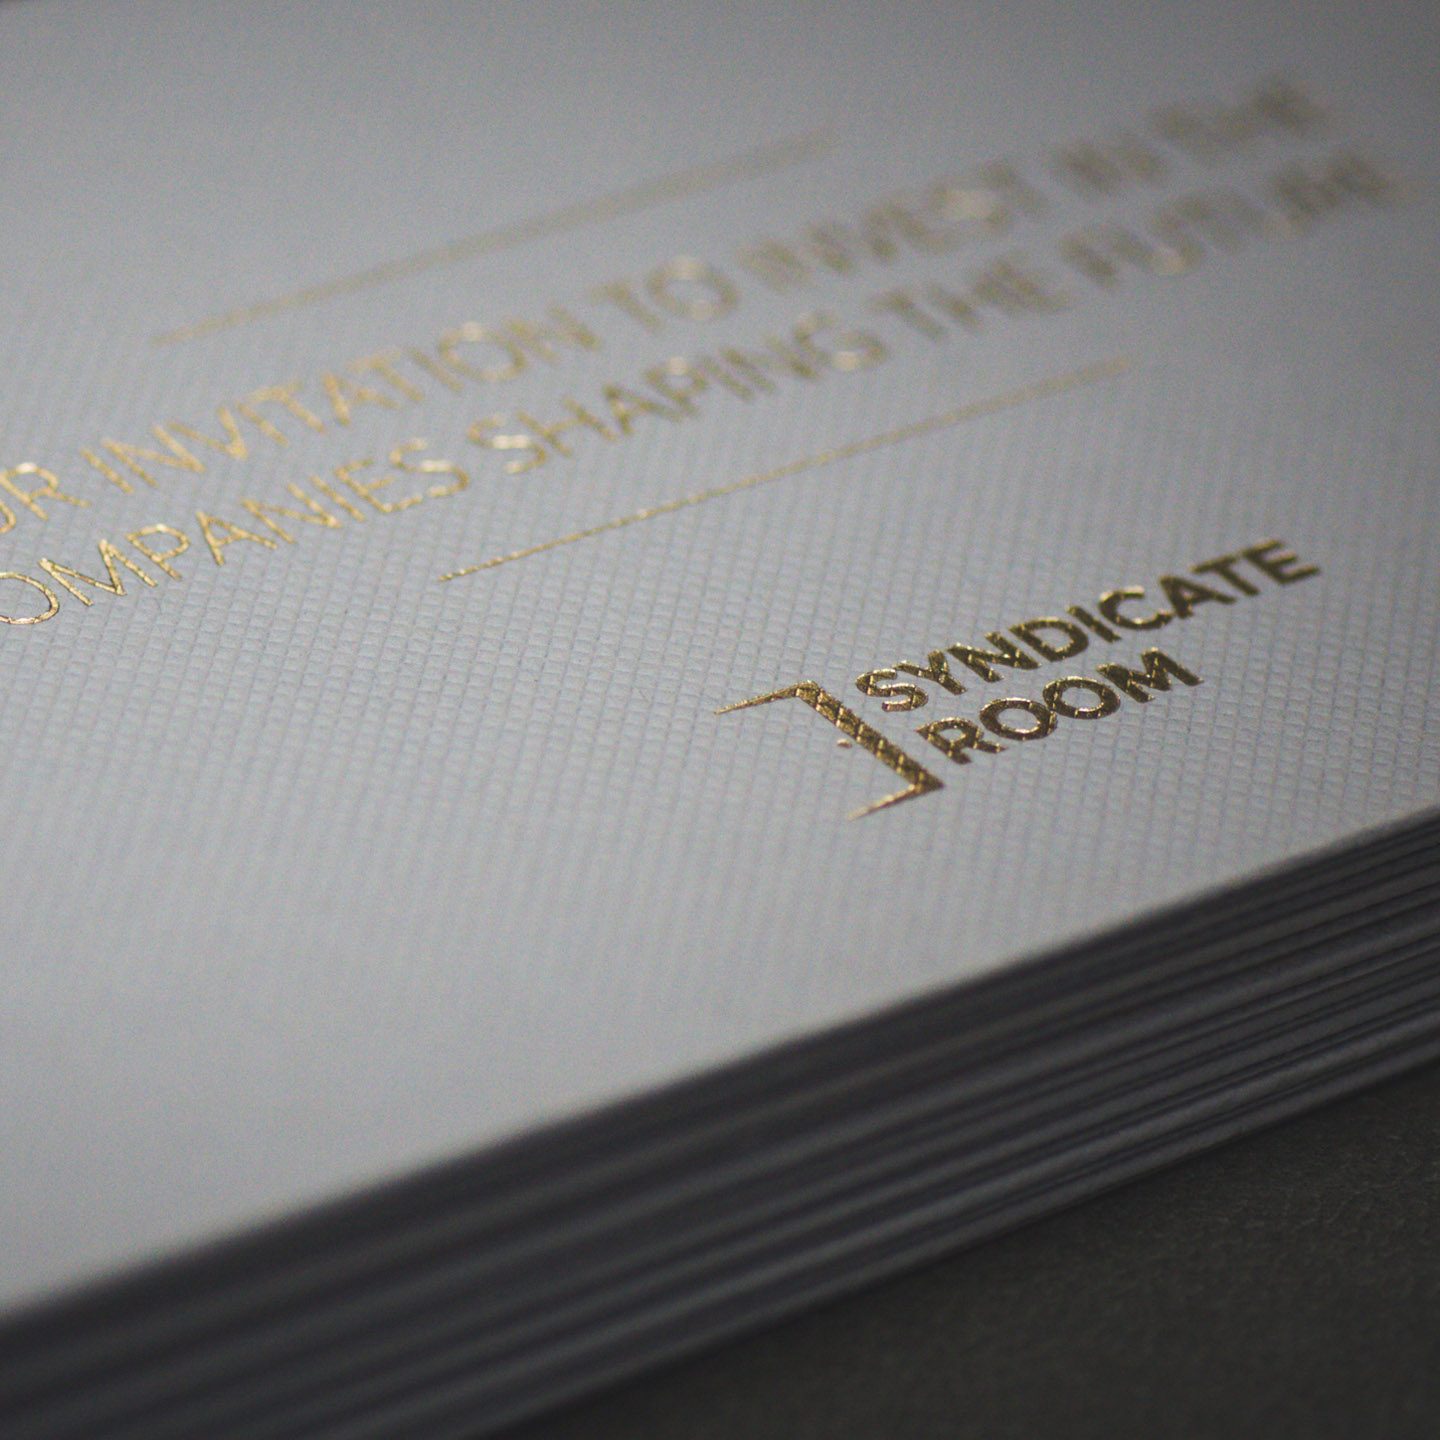 Business card with gold foil